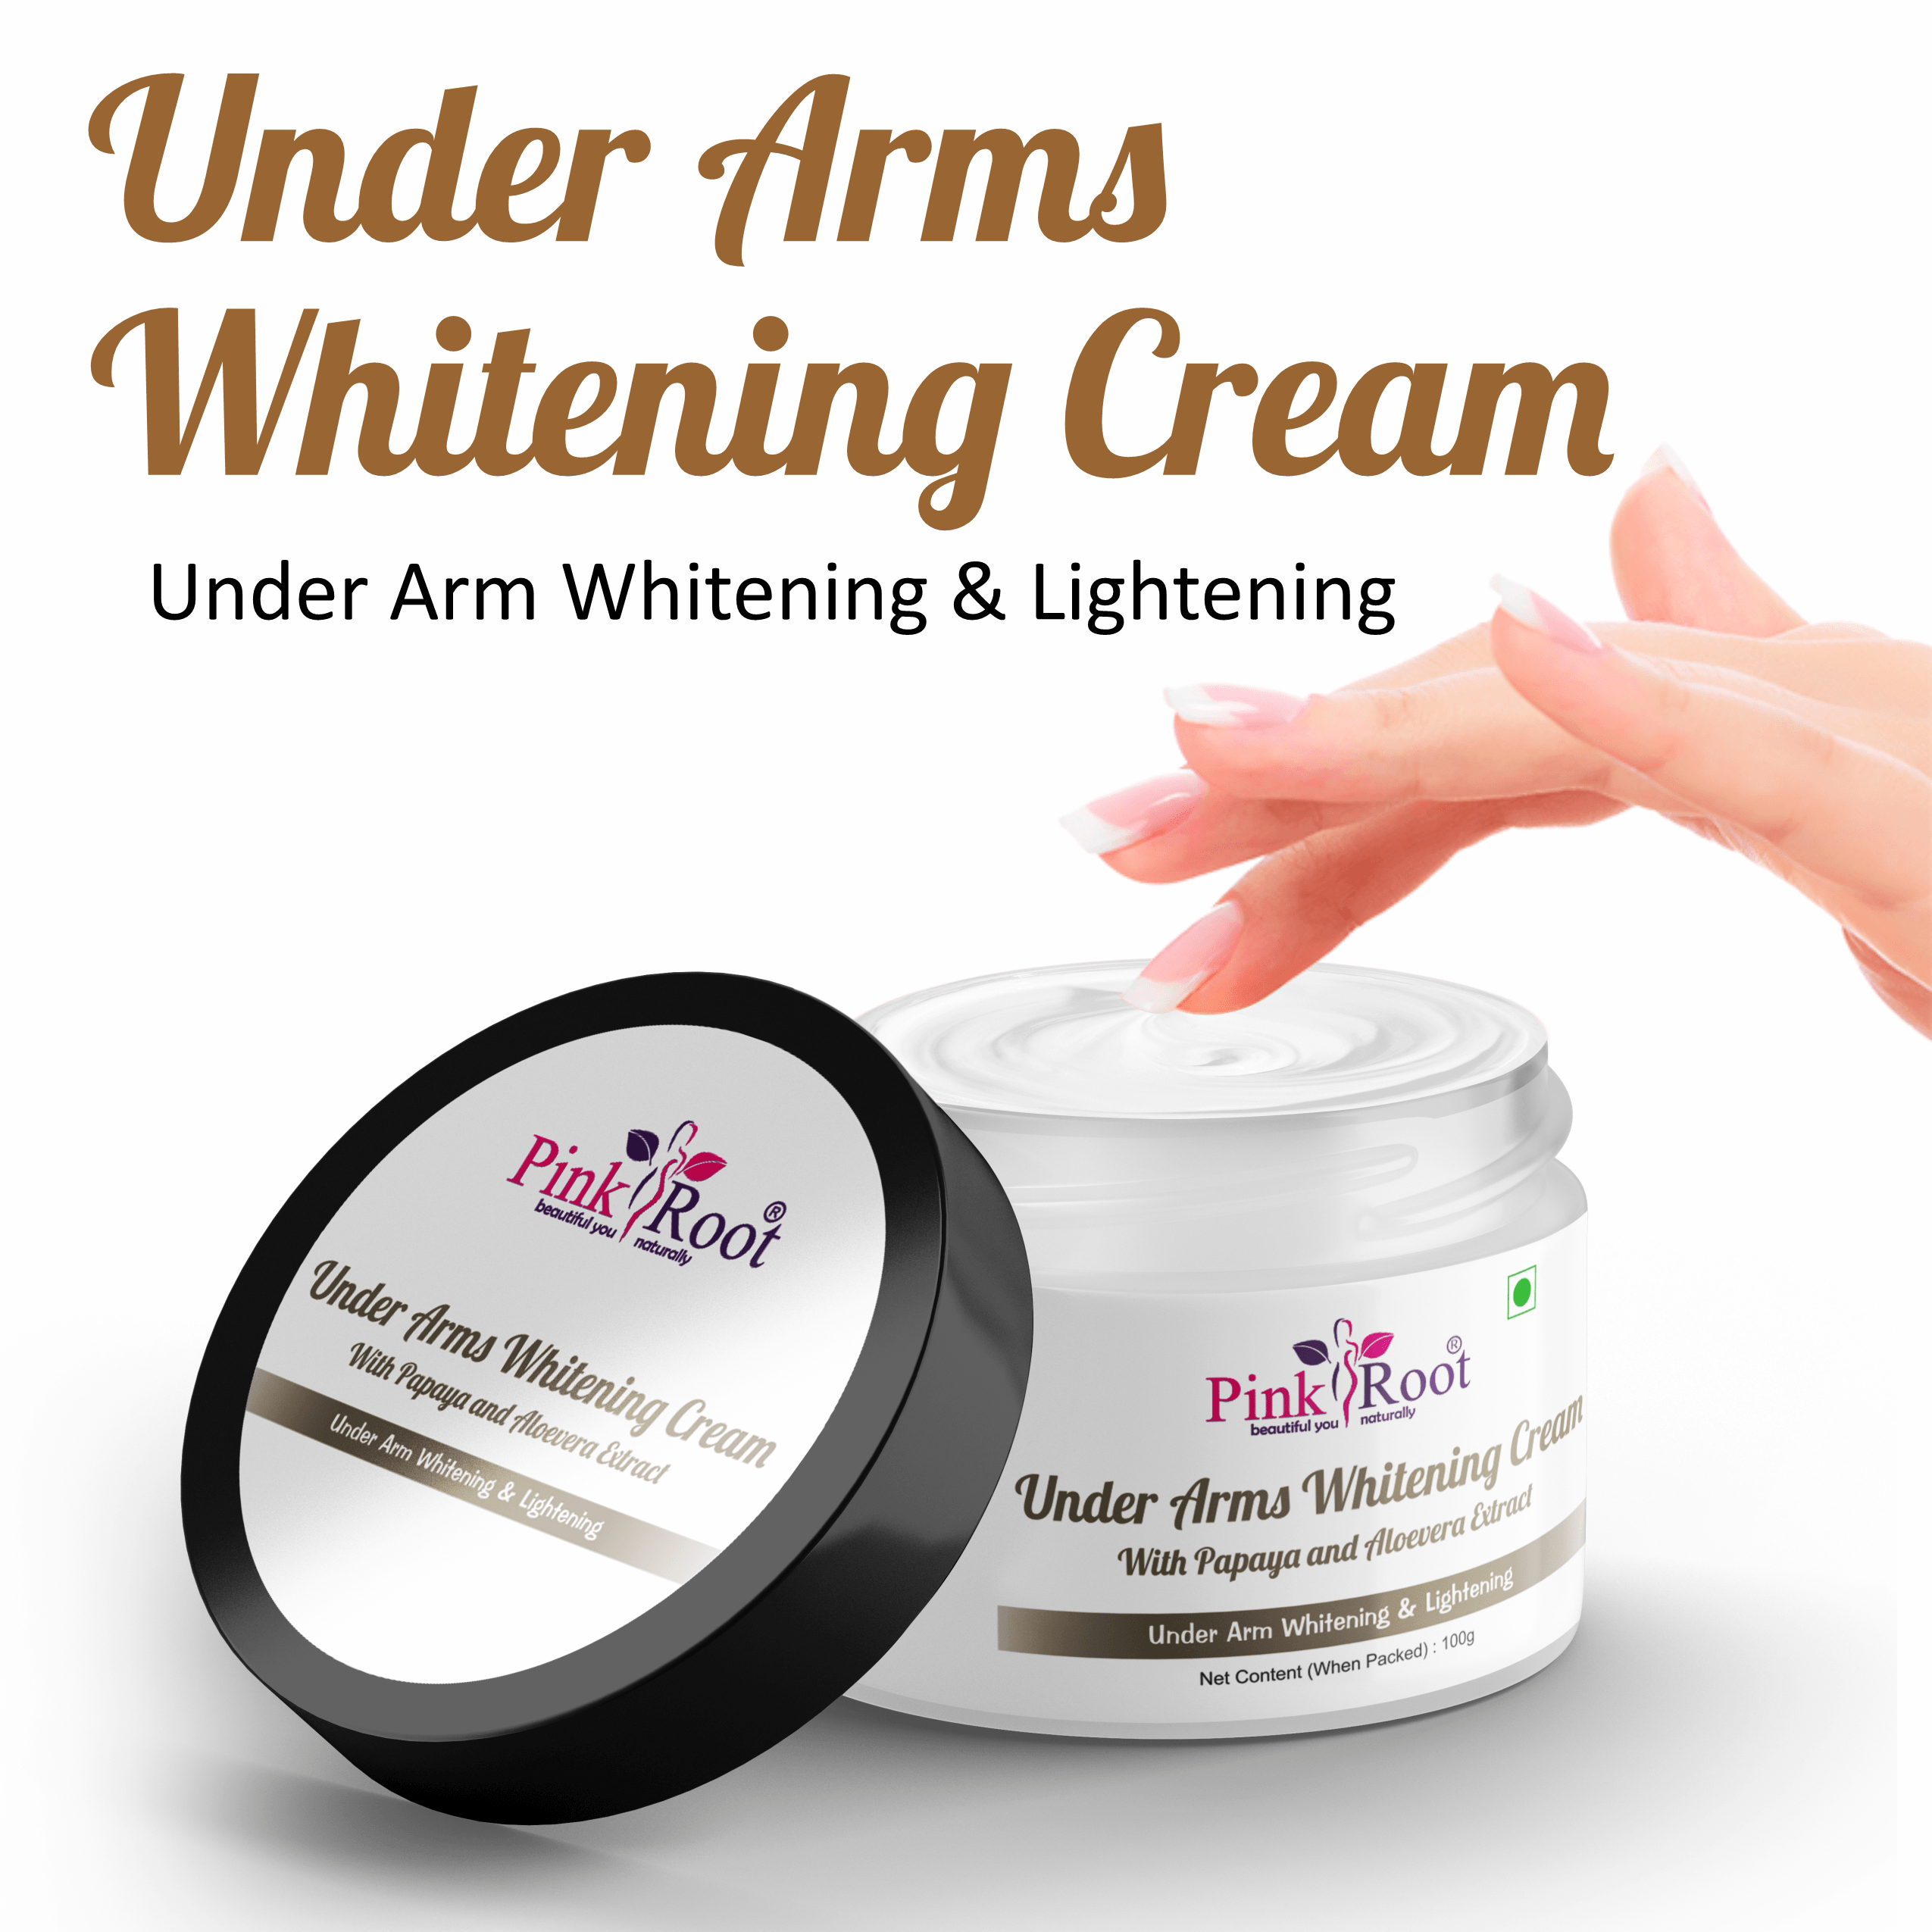 Under Arms Whitening Cream with Papaya & Aloevera Extract 100gm - Pink Root